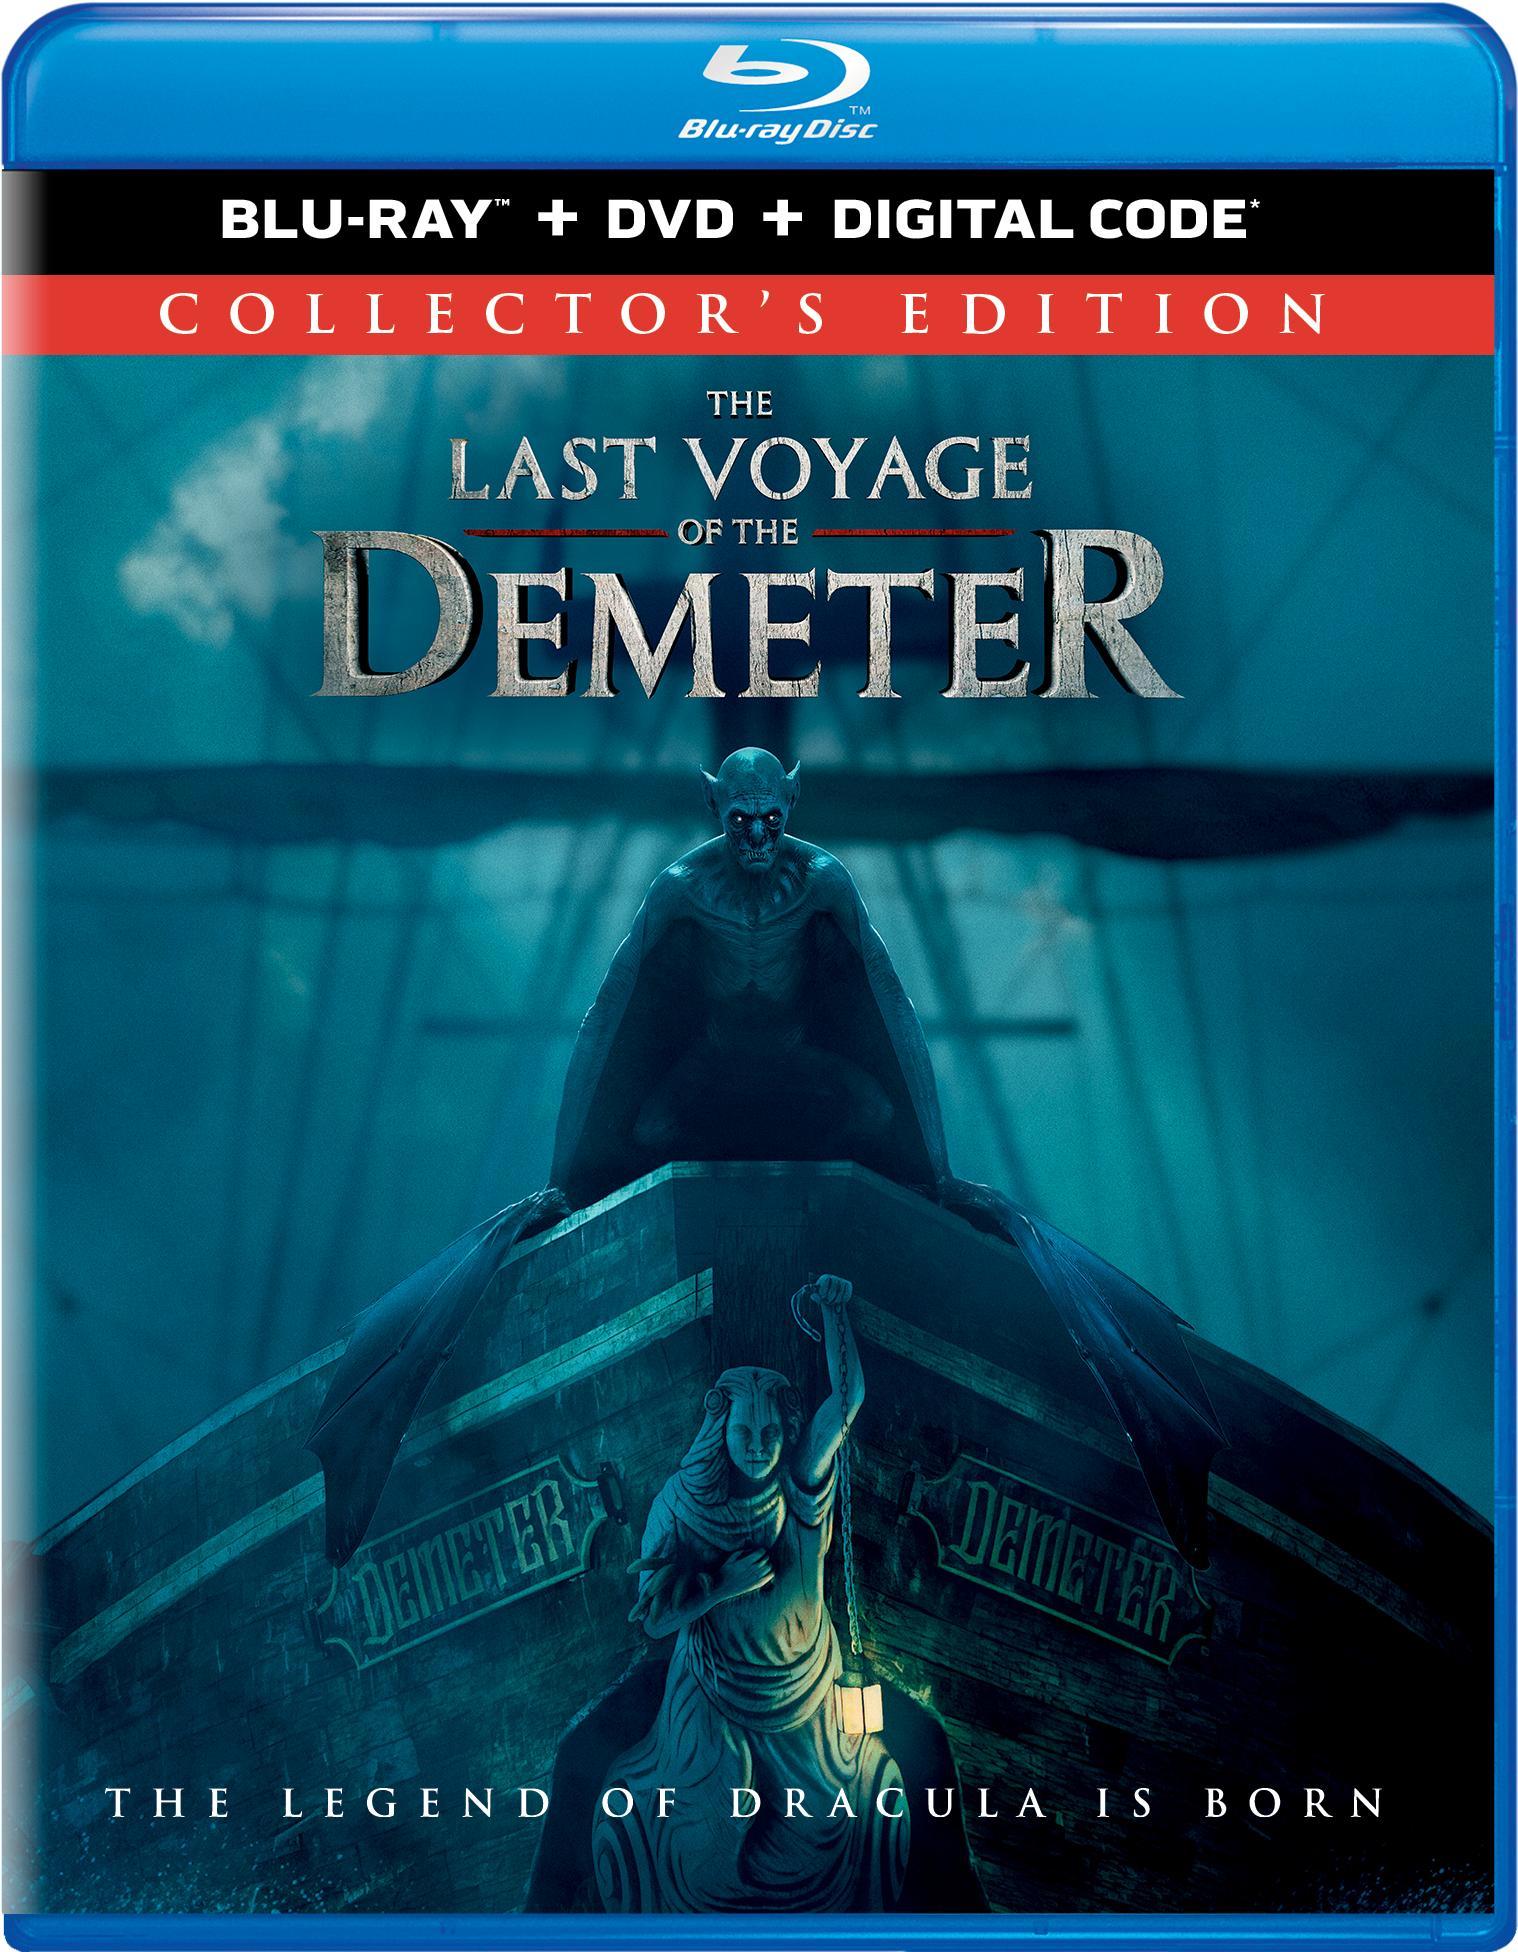 The Last Voyage Of The Demeter (with DVD) - Blu-ray